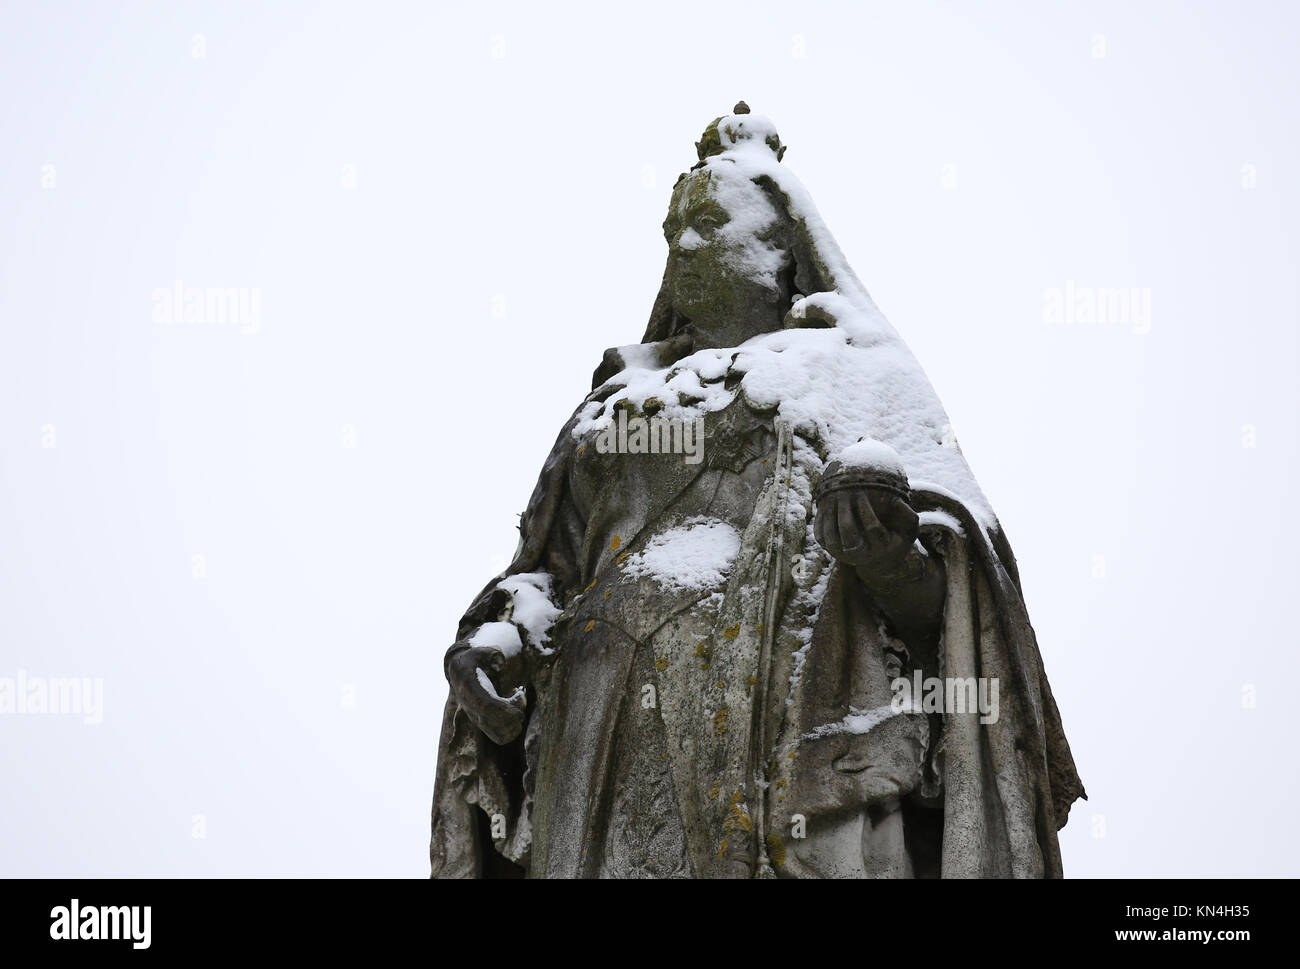 Snow on the statue of Queen Victoria in the War Memorial Gardens, Nottingham, as heavy snowfall across parts of the UK is causing widespread disruption, closing roads and grounding flights at an airport. Stock Photo